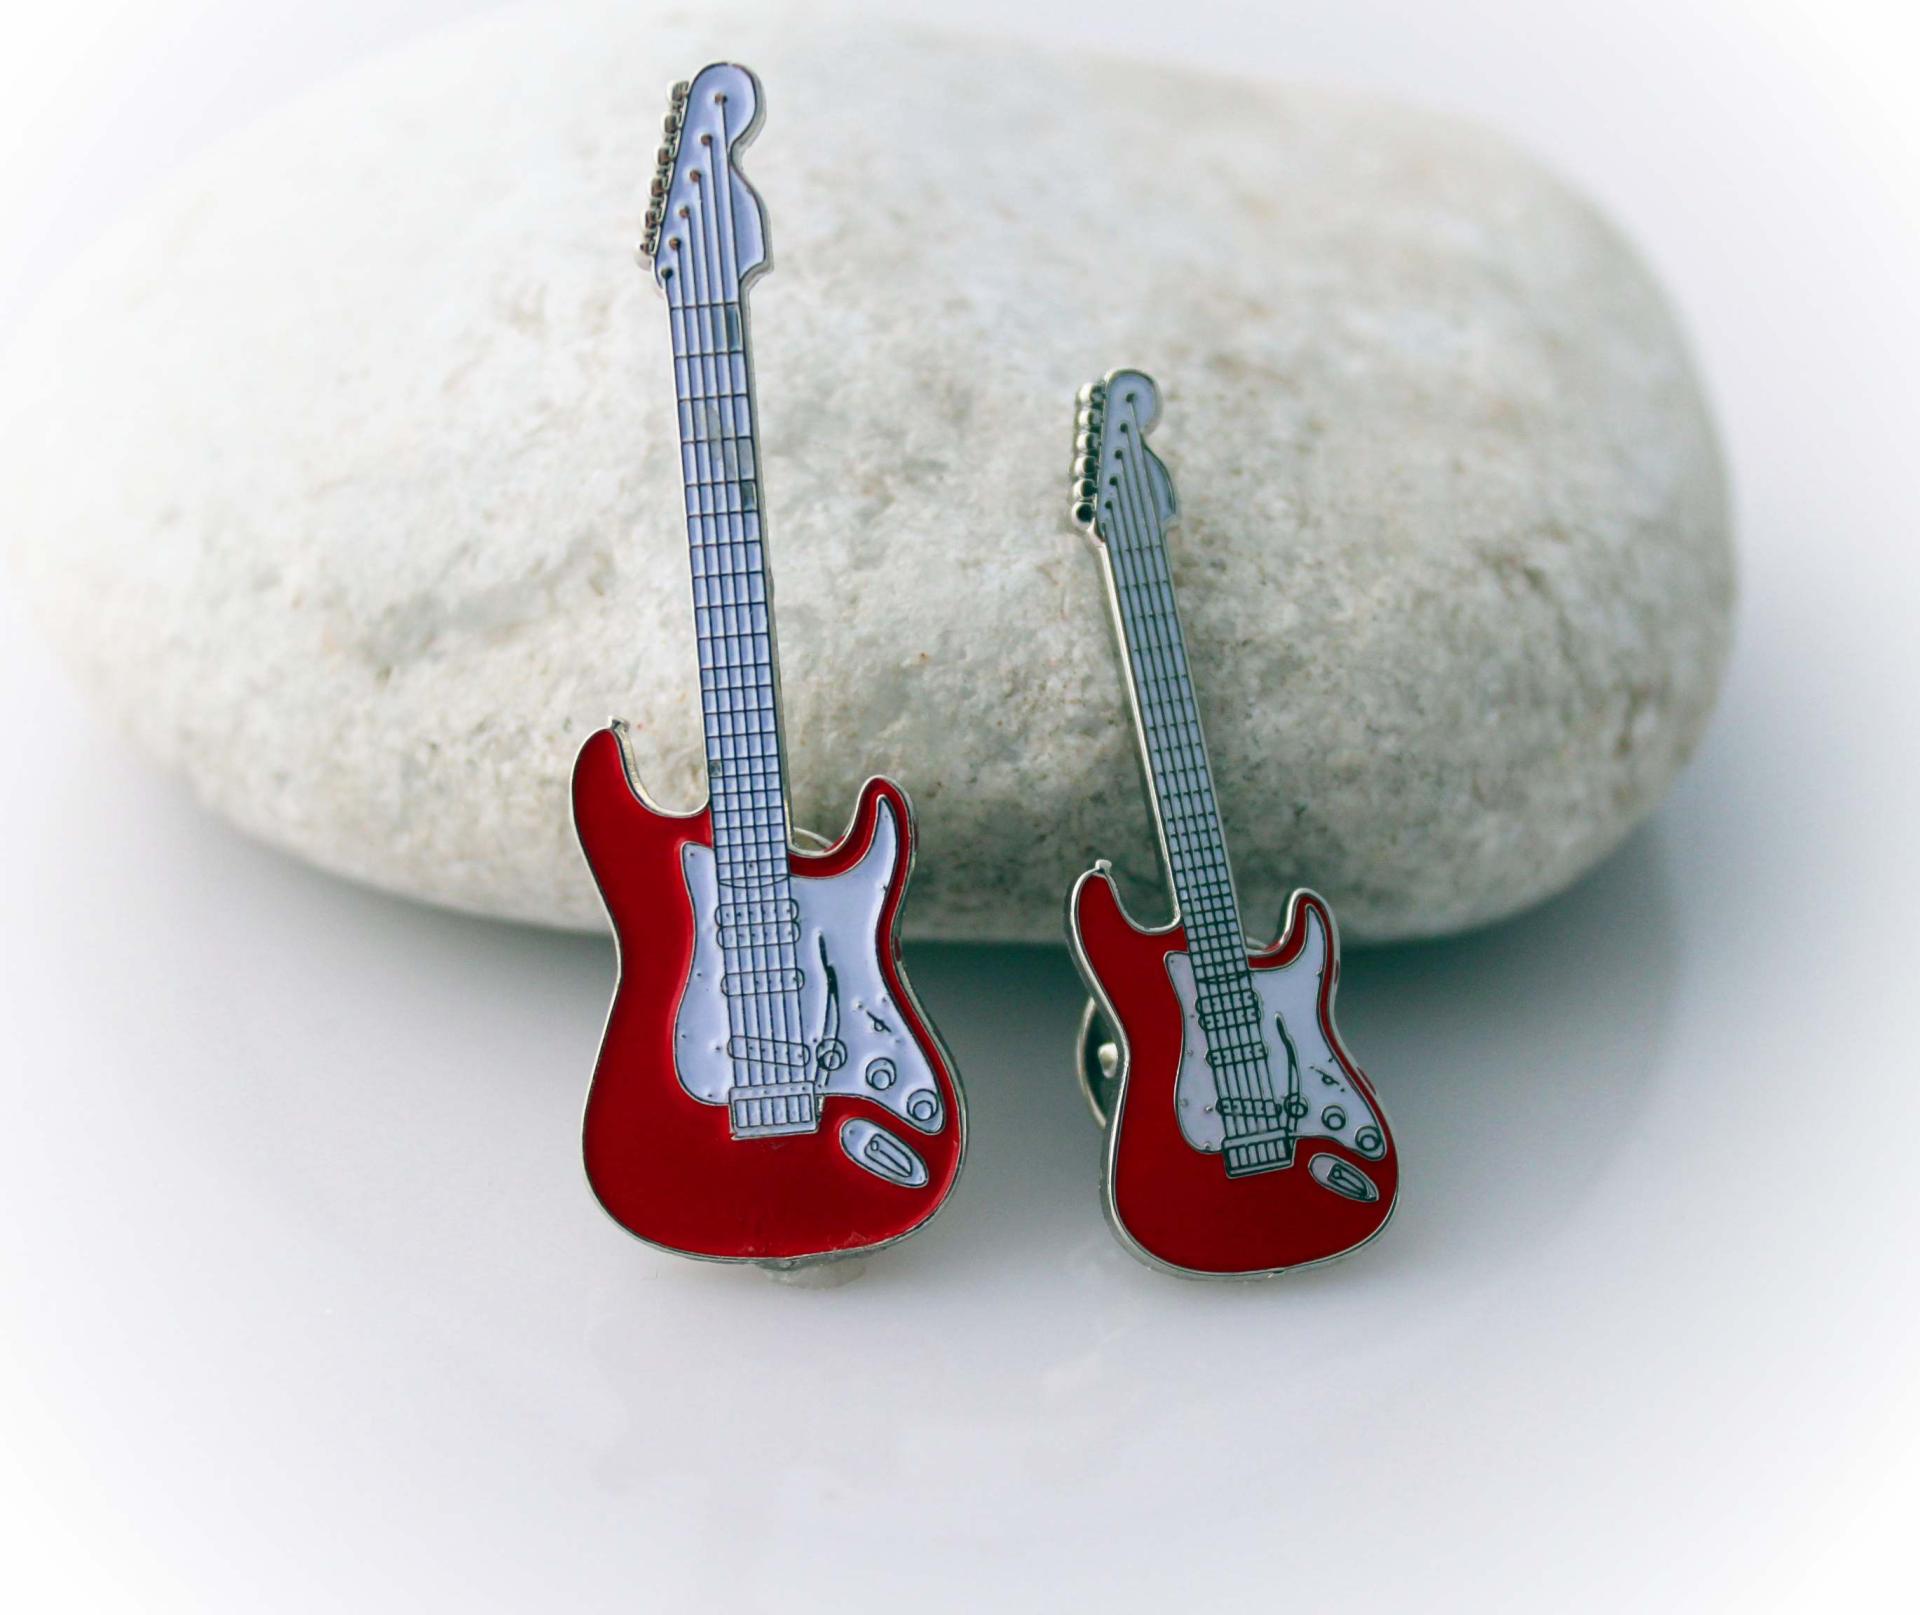 Fender Stratocaster Style Red Pin Badge - Standard Size & Super Size!